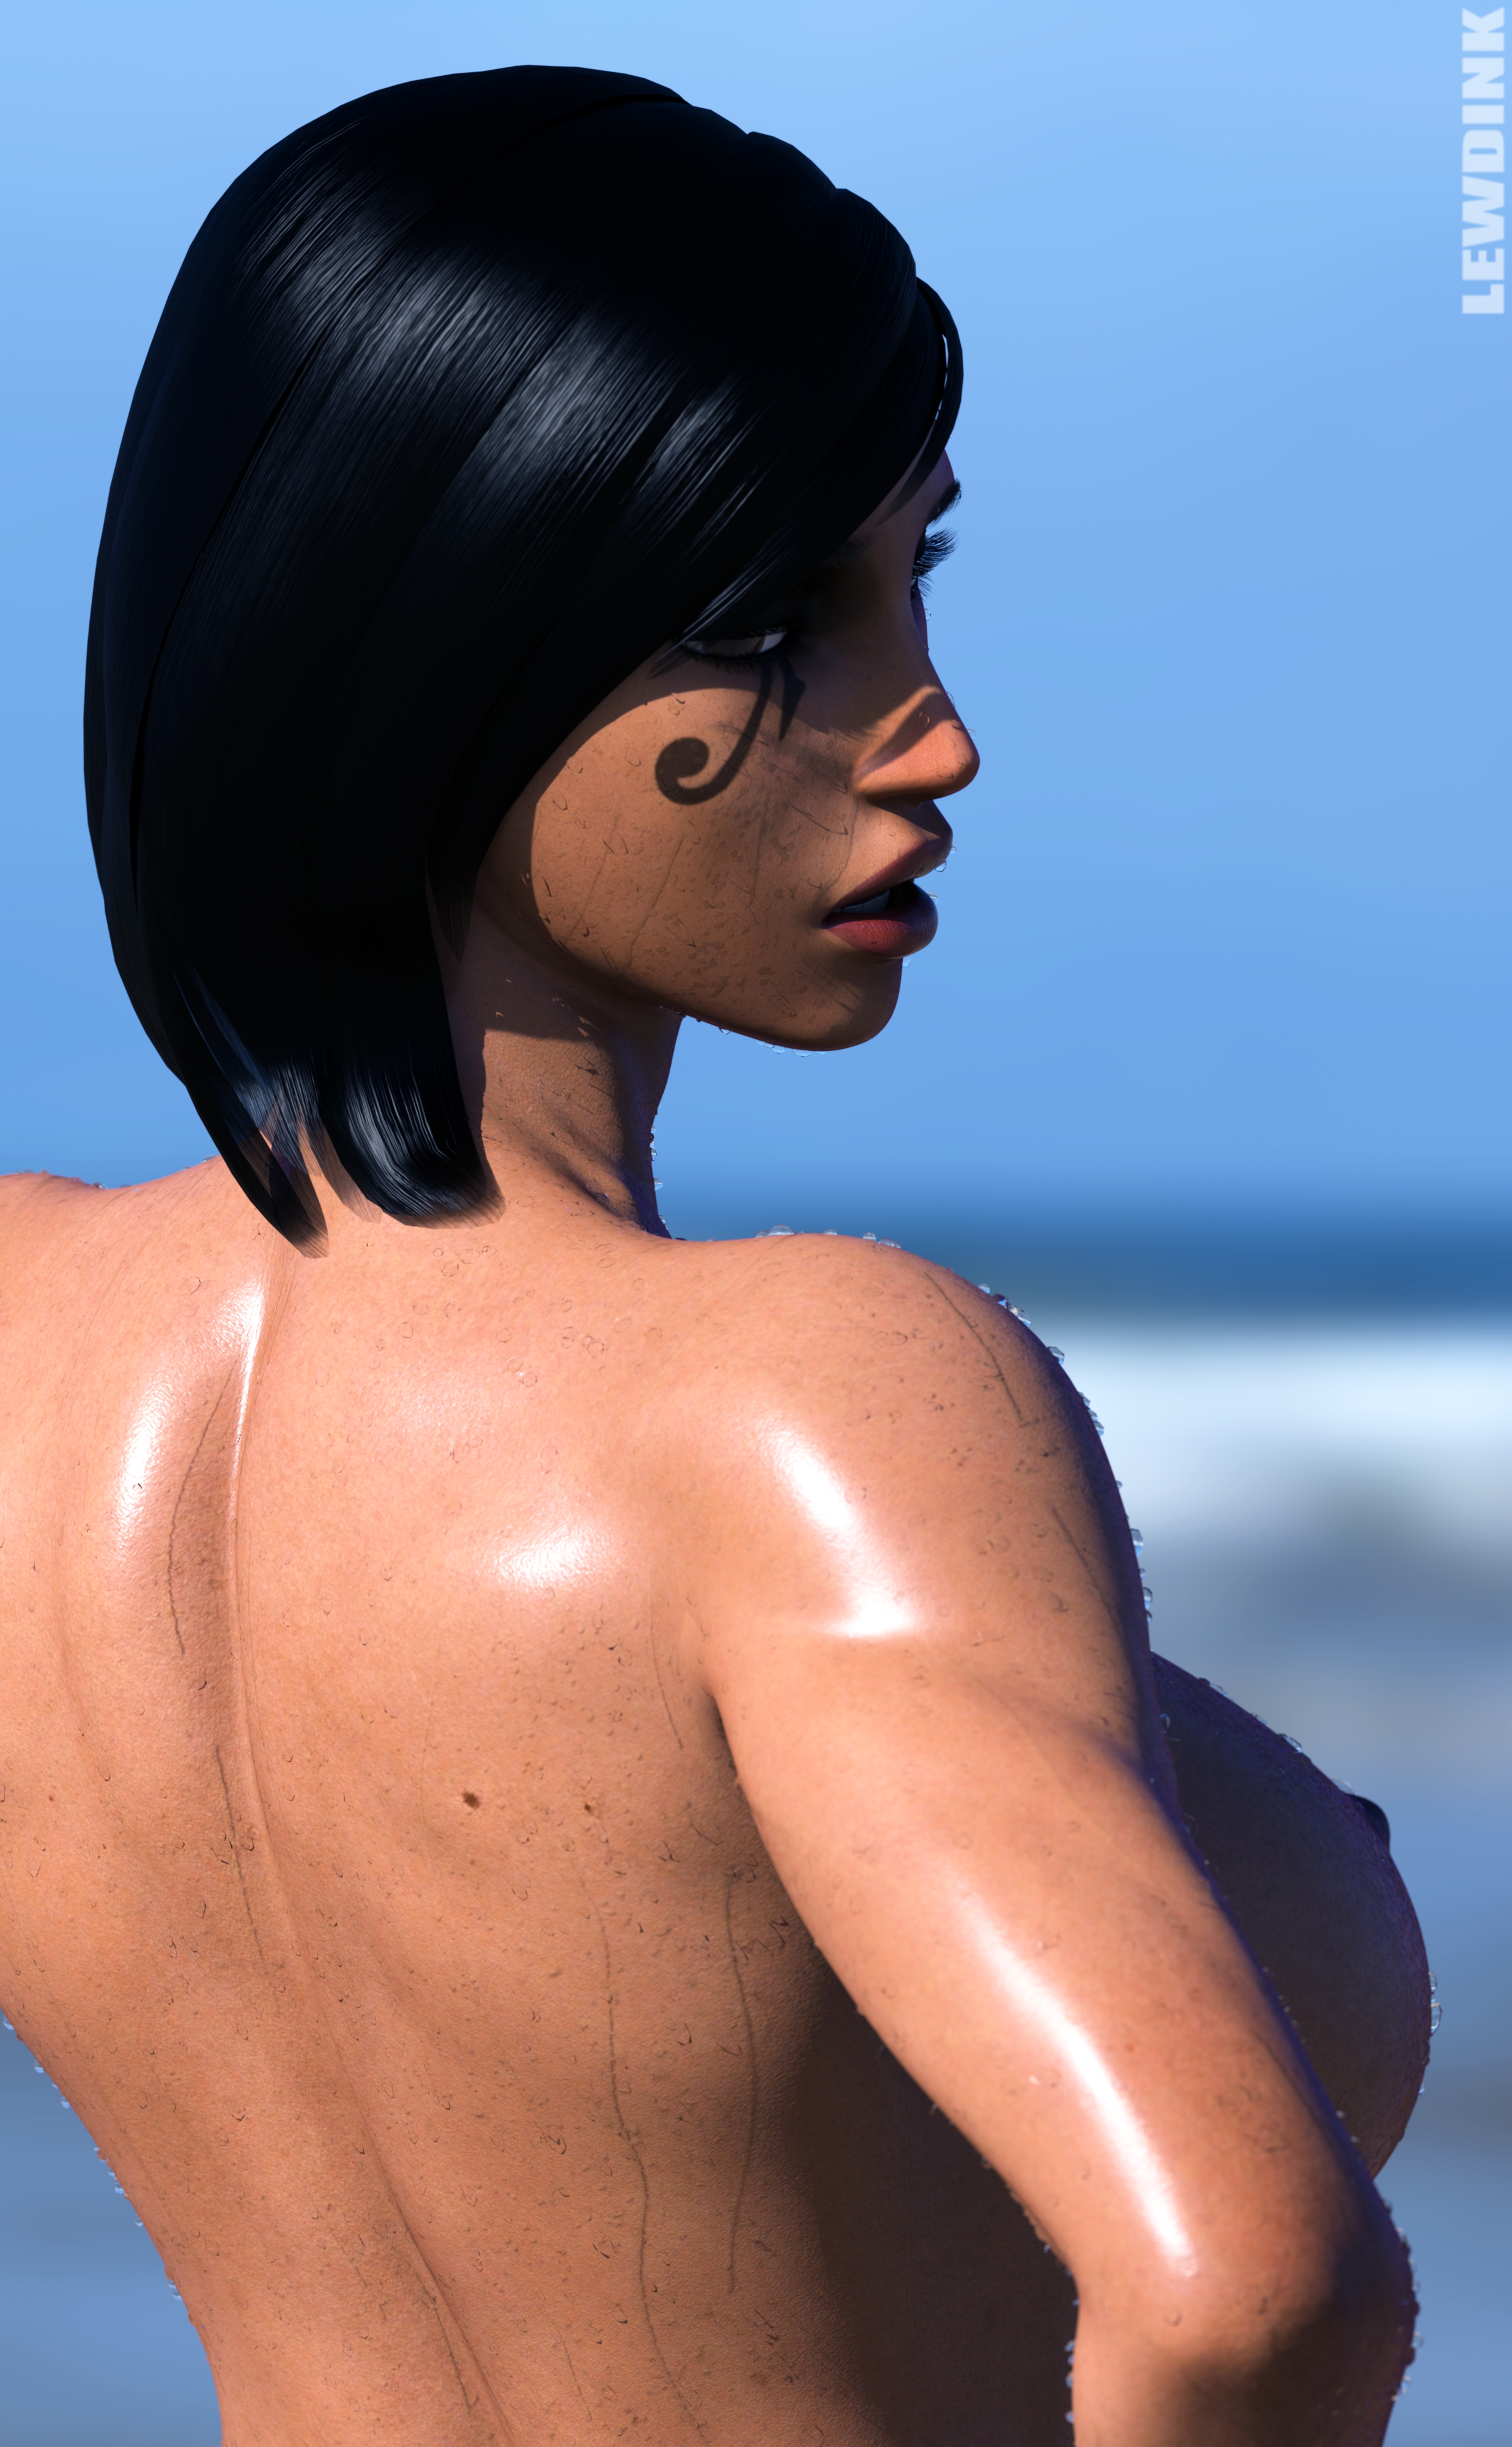 Pharah - Beach Pharah Pharah (overwatch) Overwatch Muscular Girl 3d Porn 3d Girl 3dnsfw 3dxgirls Abs Brunette Tattoo Tattoos Sexy Hot Bimbo Huge Boobs Huge Ass Huge Tits Muscles Musclegirl Pinup Animated Perfect Body Nude Nudes Big Booty Booty Ass Big Ass Nipple Piercing Piercing Belly Button Piercing Cowgirl Cowgirl Position Fuck Hard Sexyhot Lingerie Sexy Ass Sexy Lingerie Sexy Woman Fake Tits Lips Thong Beach Sunset Glasses Topless Big Tits Sweaty Standing 7